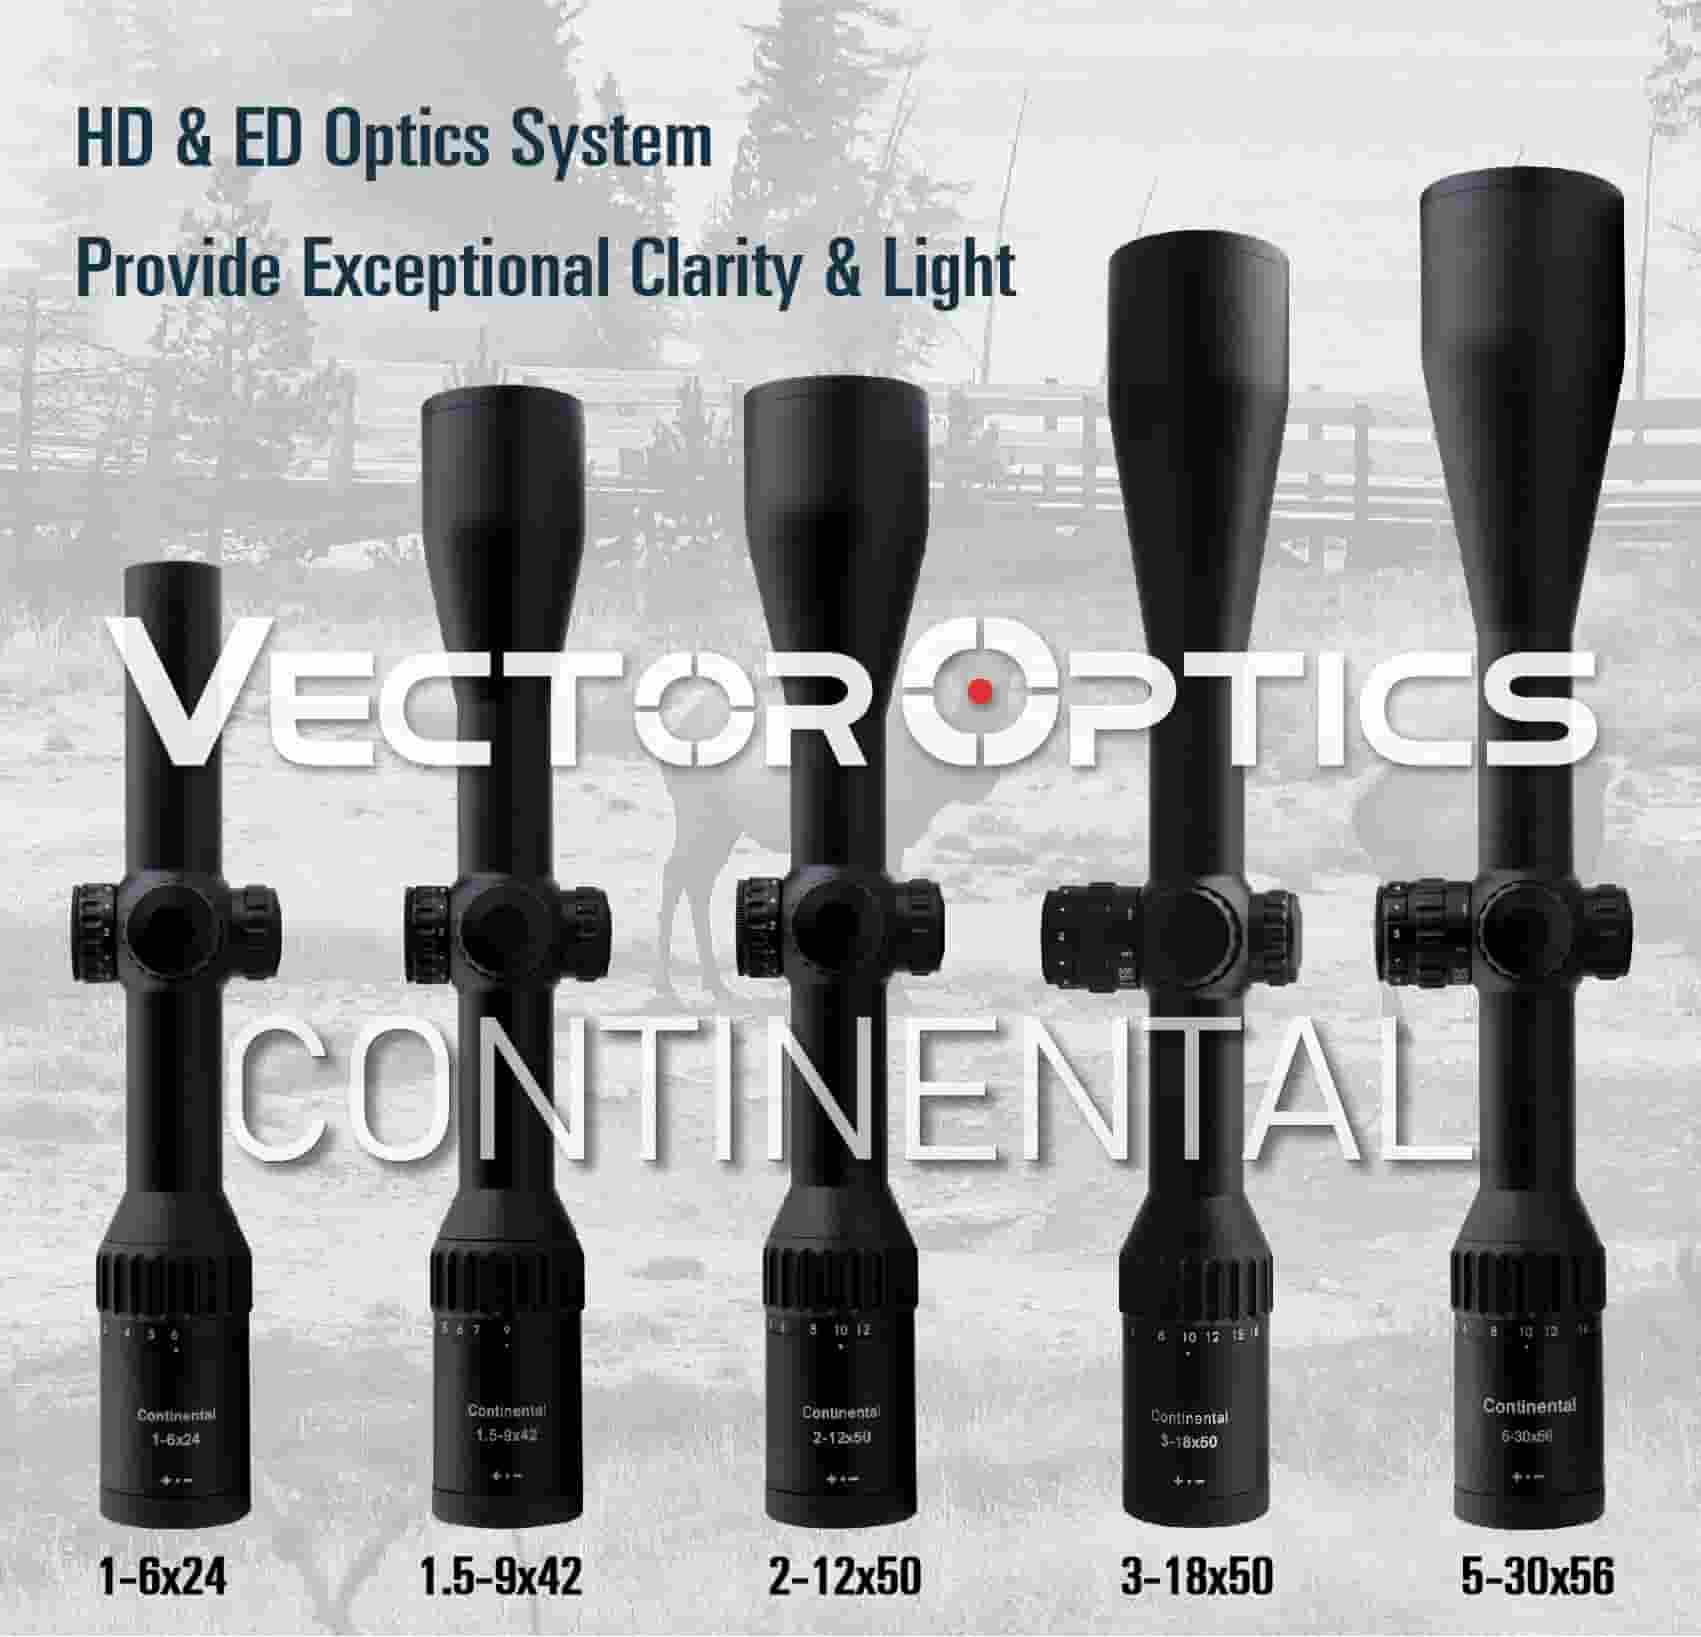 Vector Optics Continental Scopes---A Good Riflescope at Any Price!